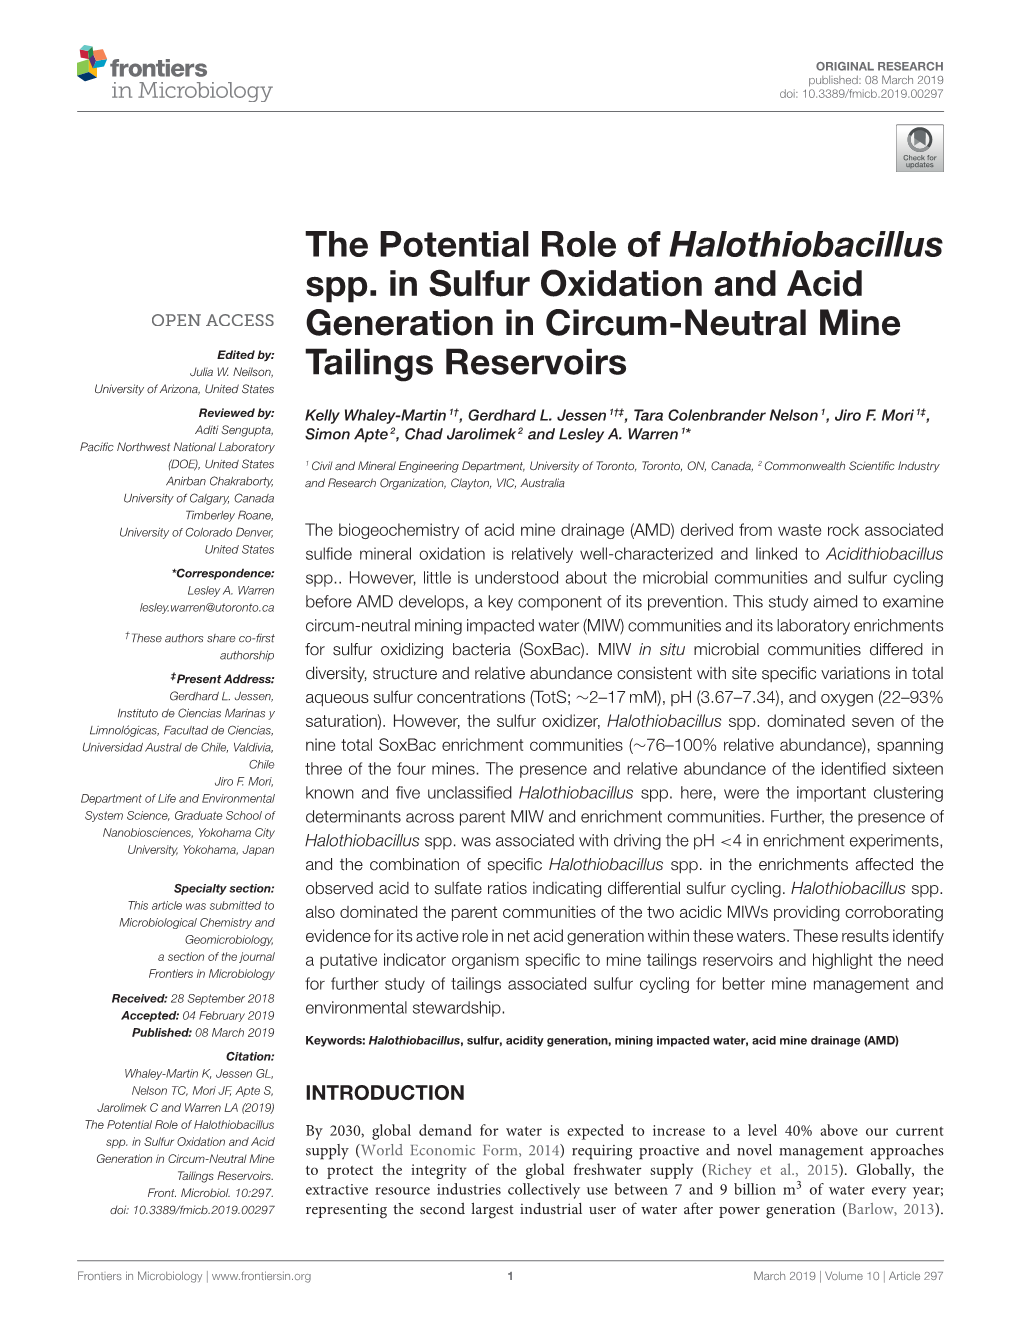 The Potential Role of Halothiobacillus Spp. in Sulfur Oxidation and Acid Generation in Circum-Neutral Mine Edited By: Julia W